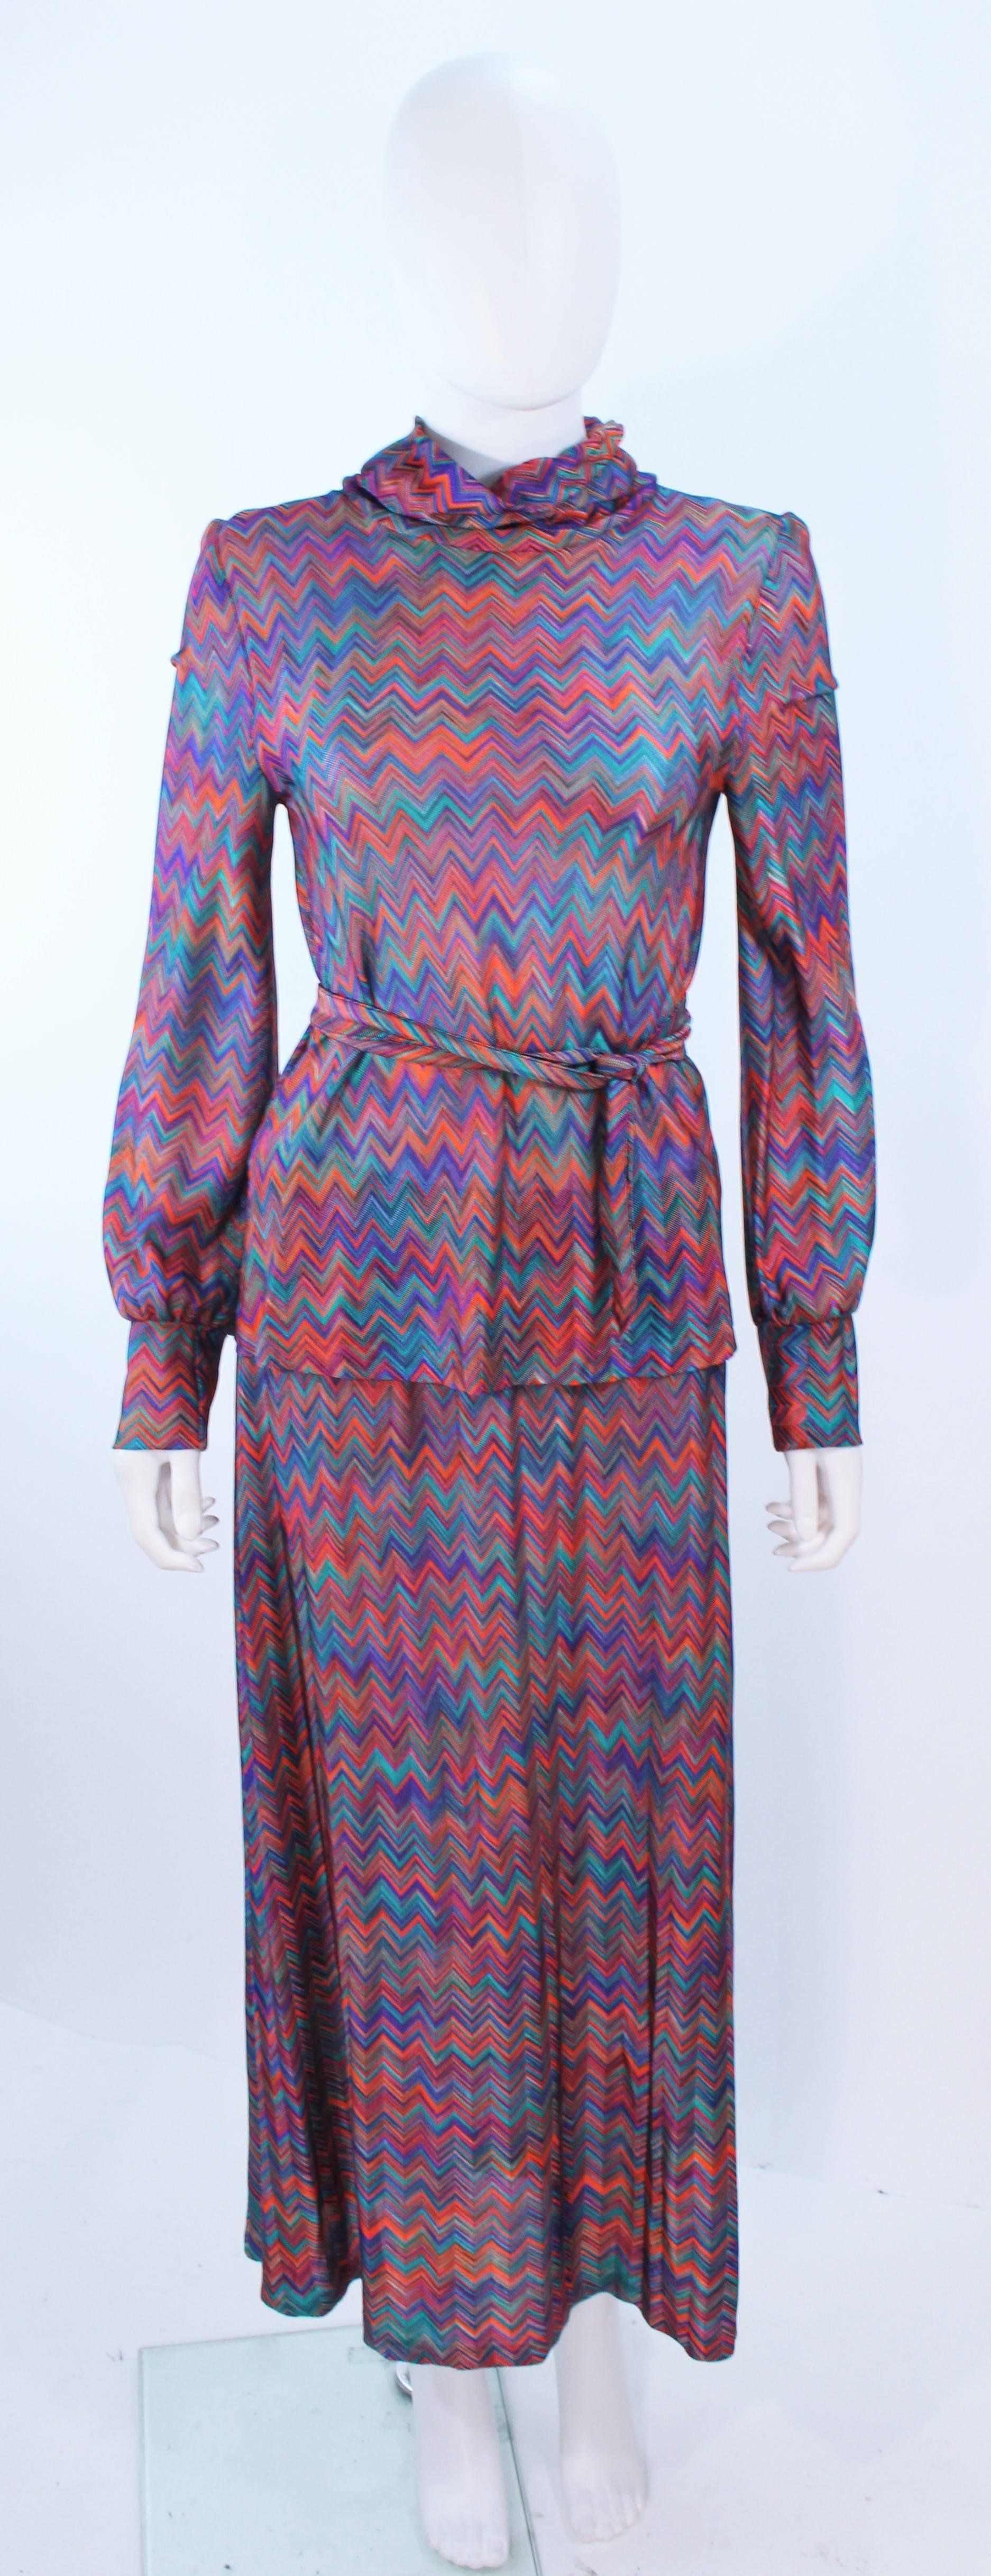 This Missoni design is composed of a purple, pink, and teal multi-color. Features a cardigan, a mock neck, sleeveless v-neck, a skirt, and two belts. In excellent vintage condition.

**Please cross-reference measurements for personal accuracy.